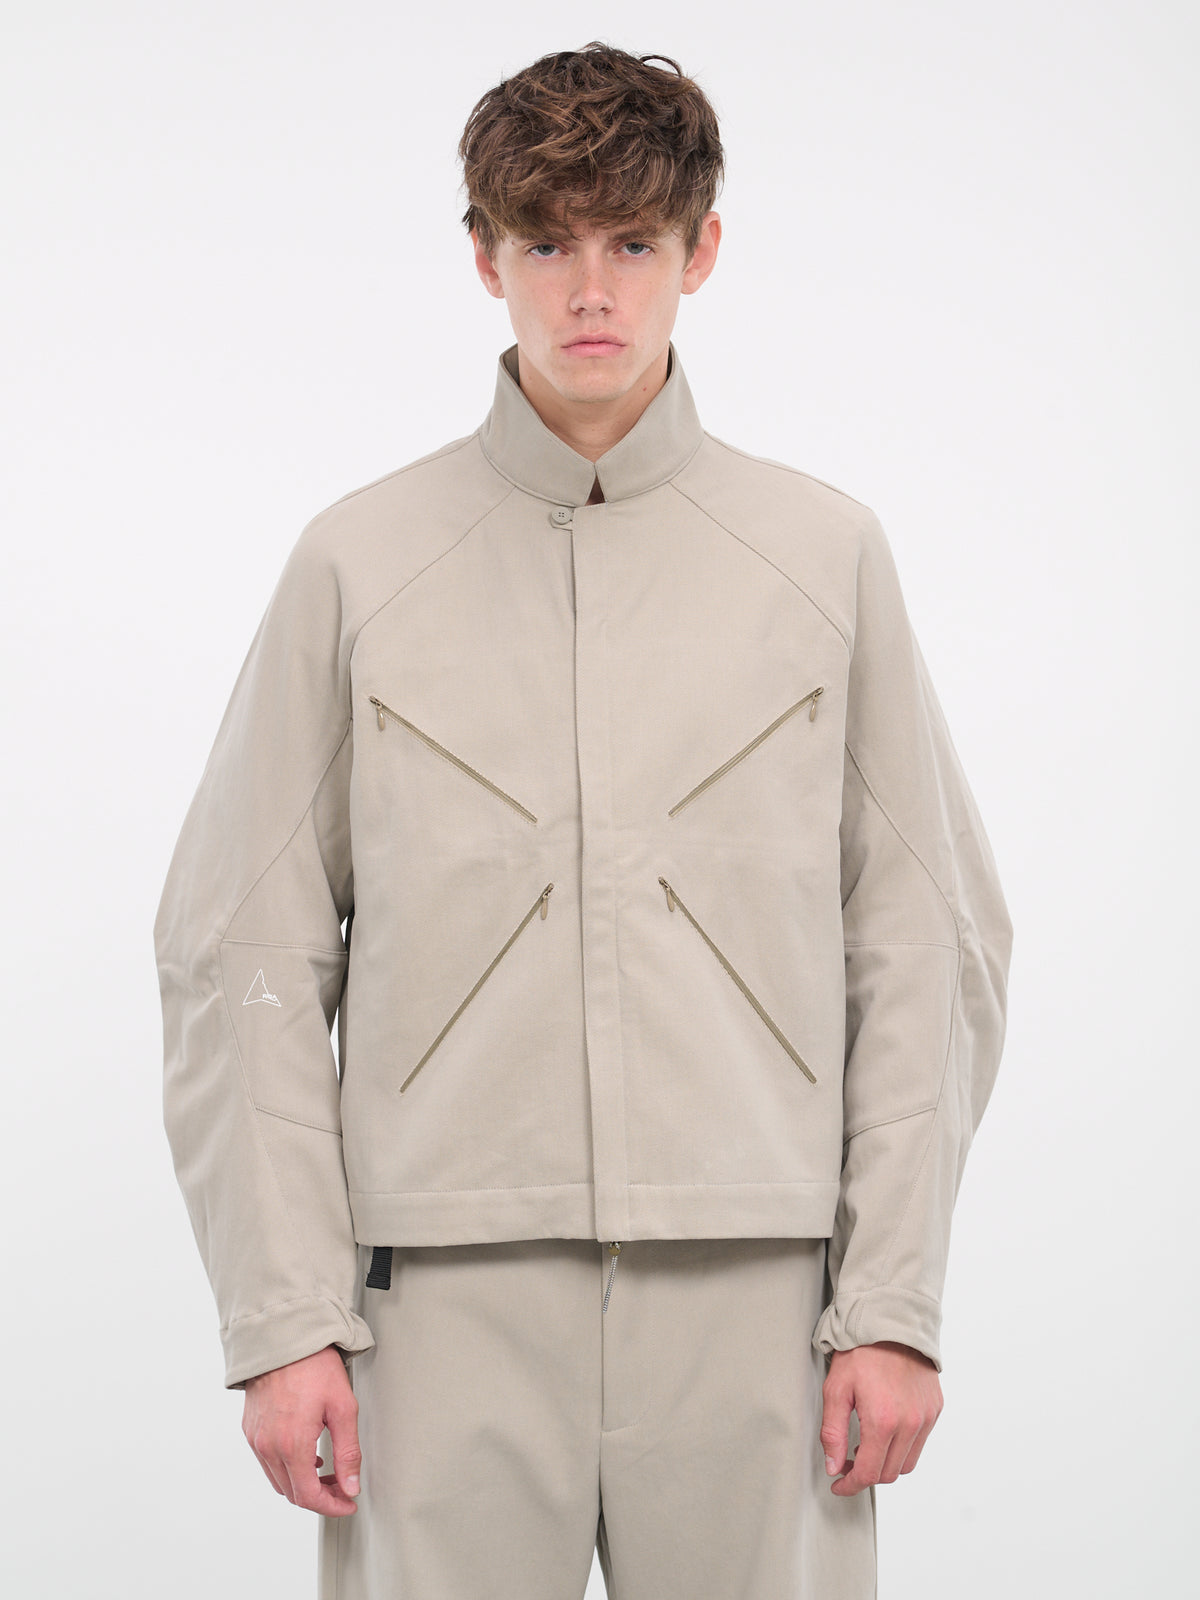 Camp Technical Shirt (014FA02-GRY0002-SILVER-SAGE)